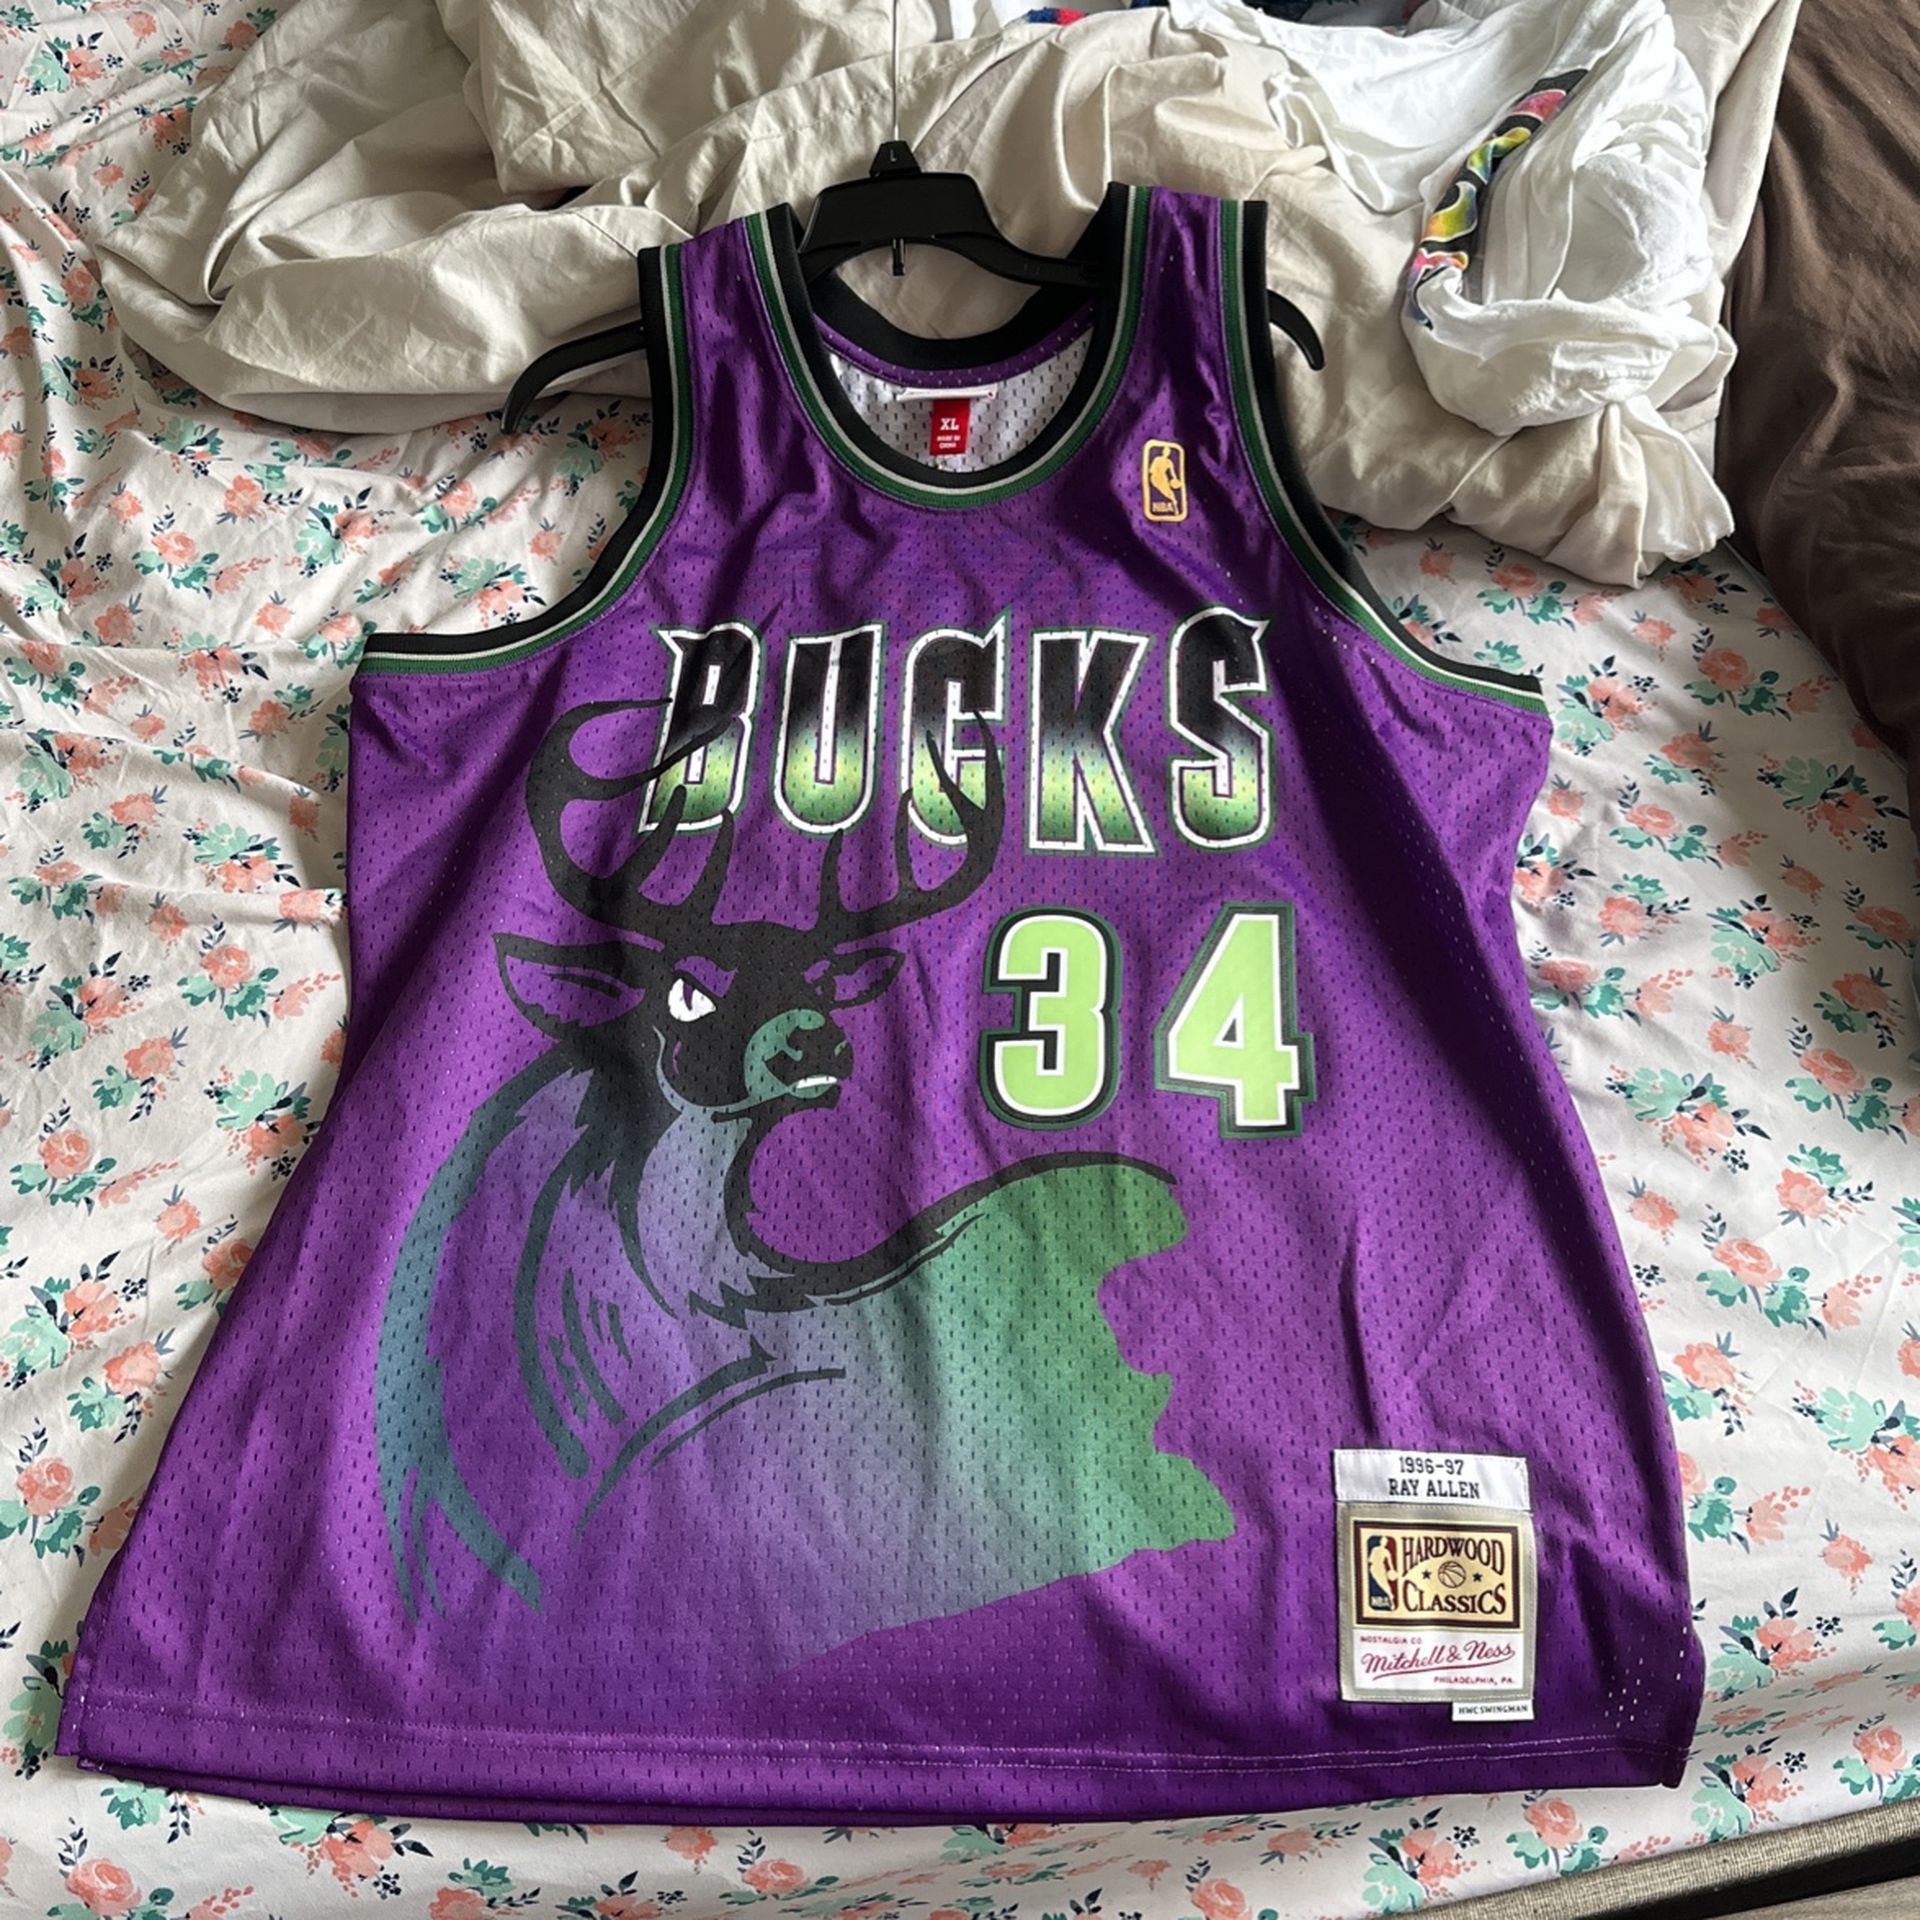 Stitched Ray Allen Bucks Jersey for Sale in Sacramento, CA - OfferUp